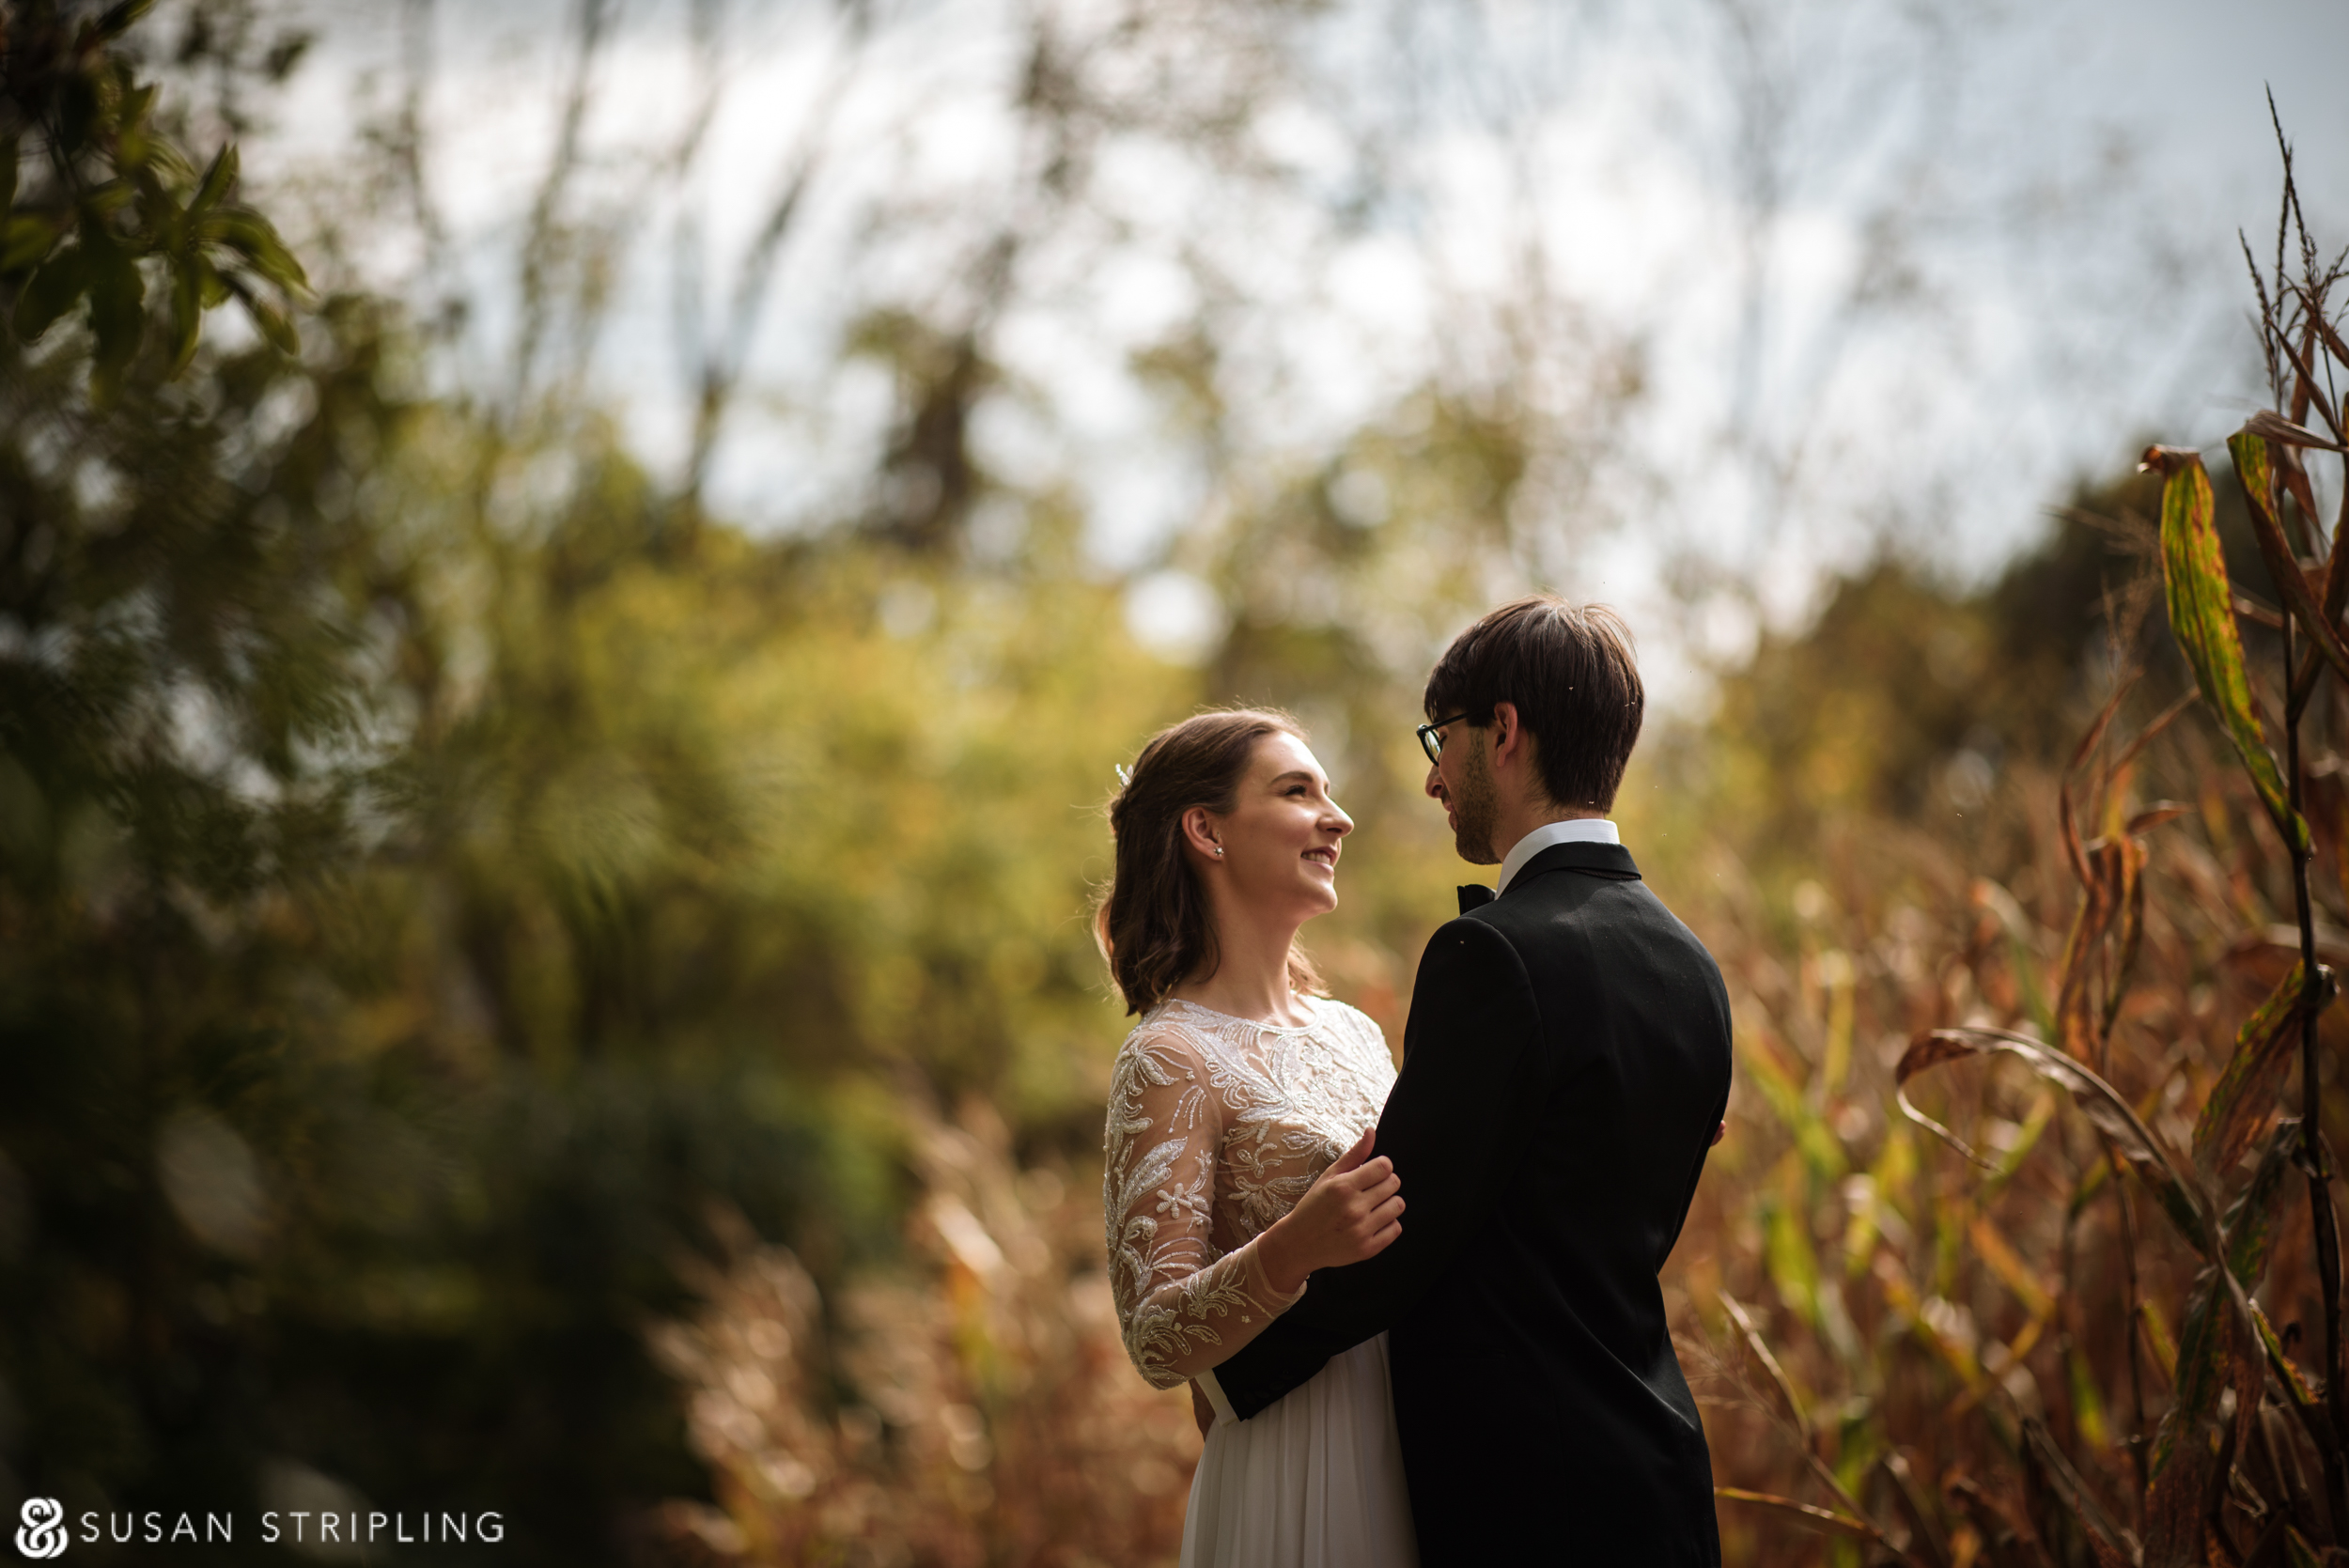 A bride and groom standing in a corn field, captured during their magical wedding at the Hotel Du Village.